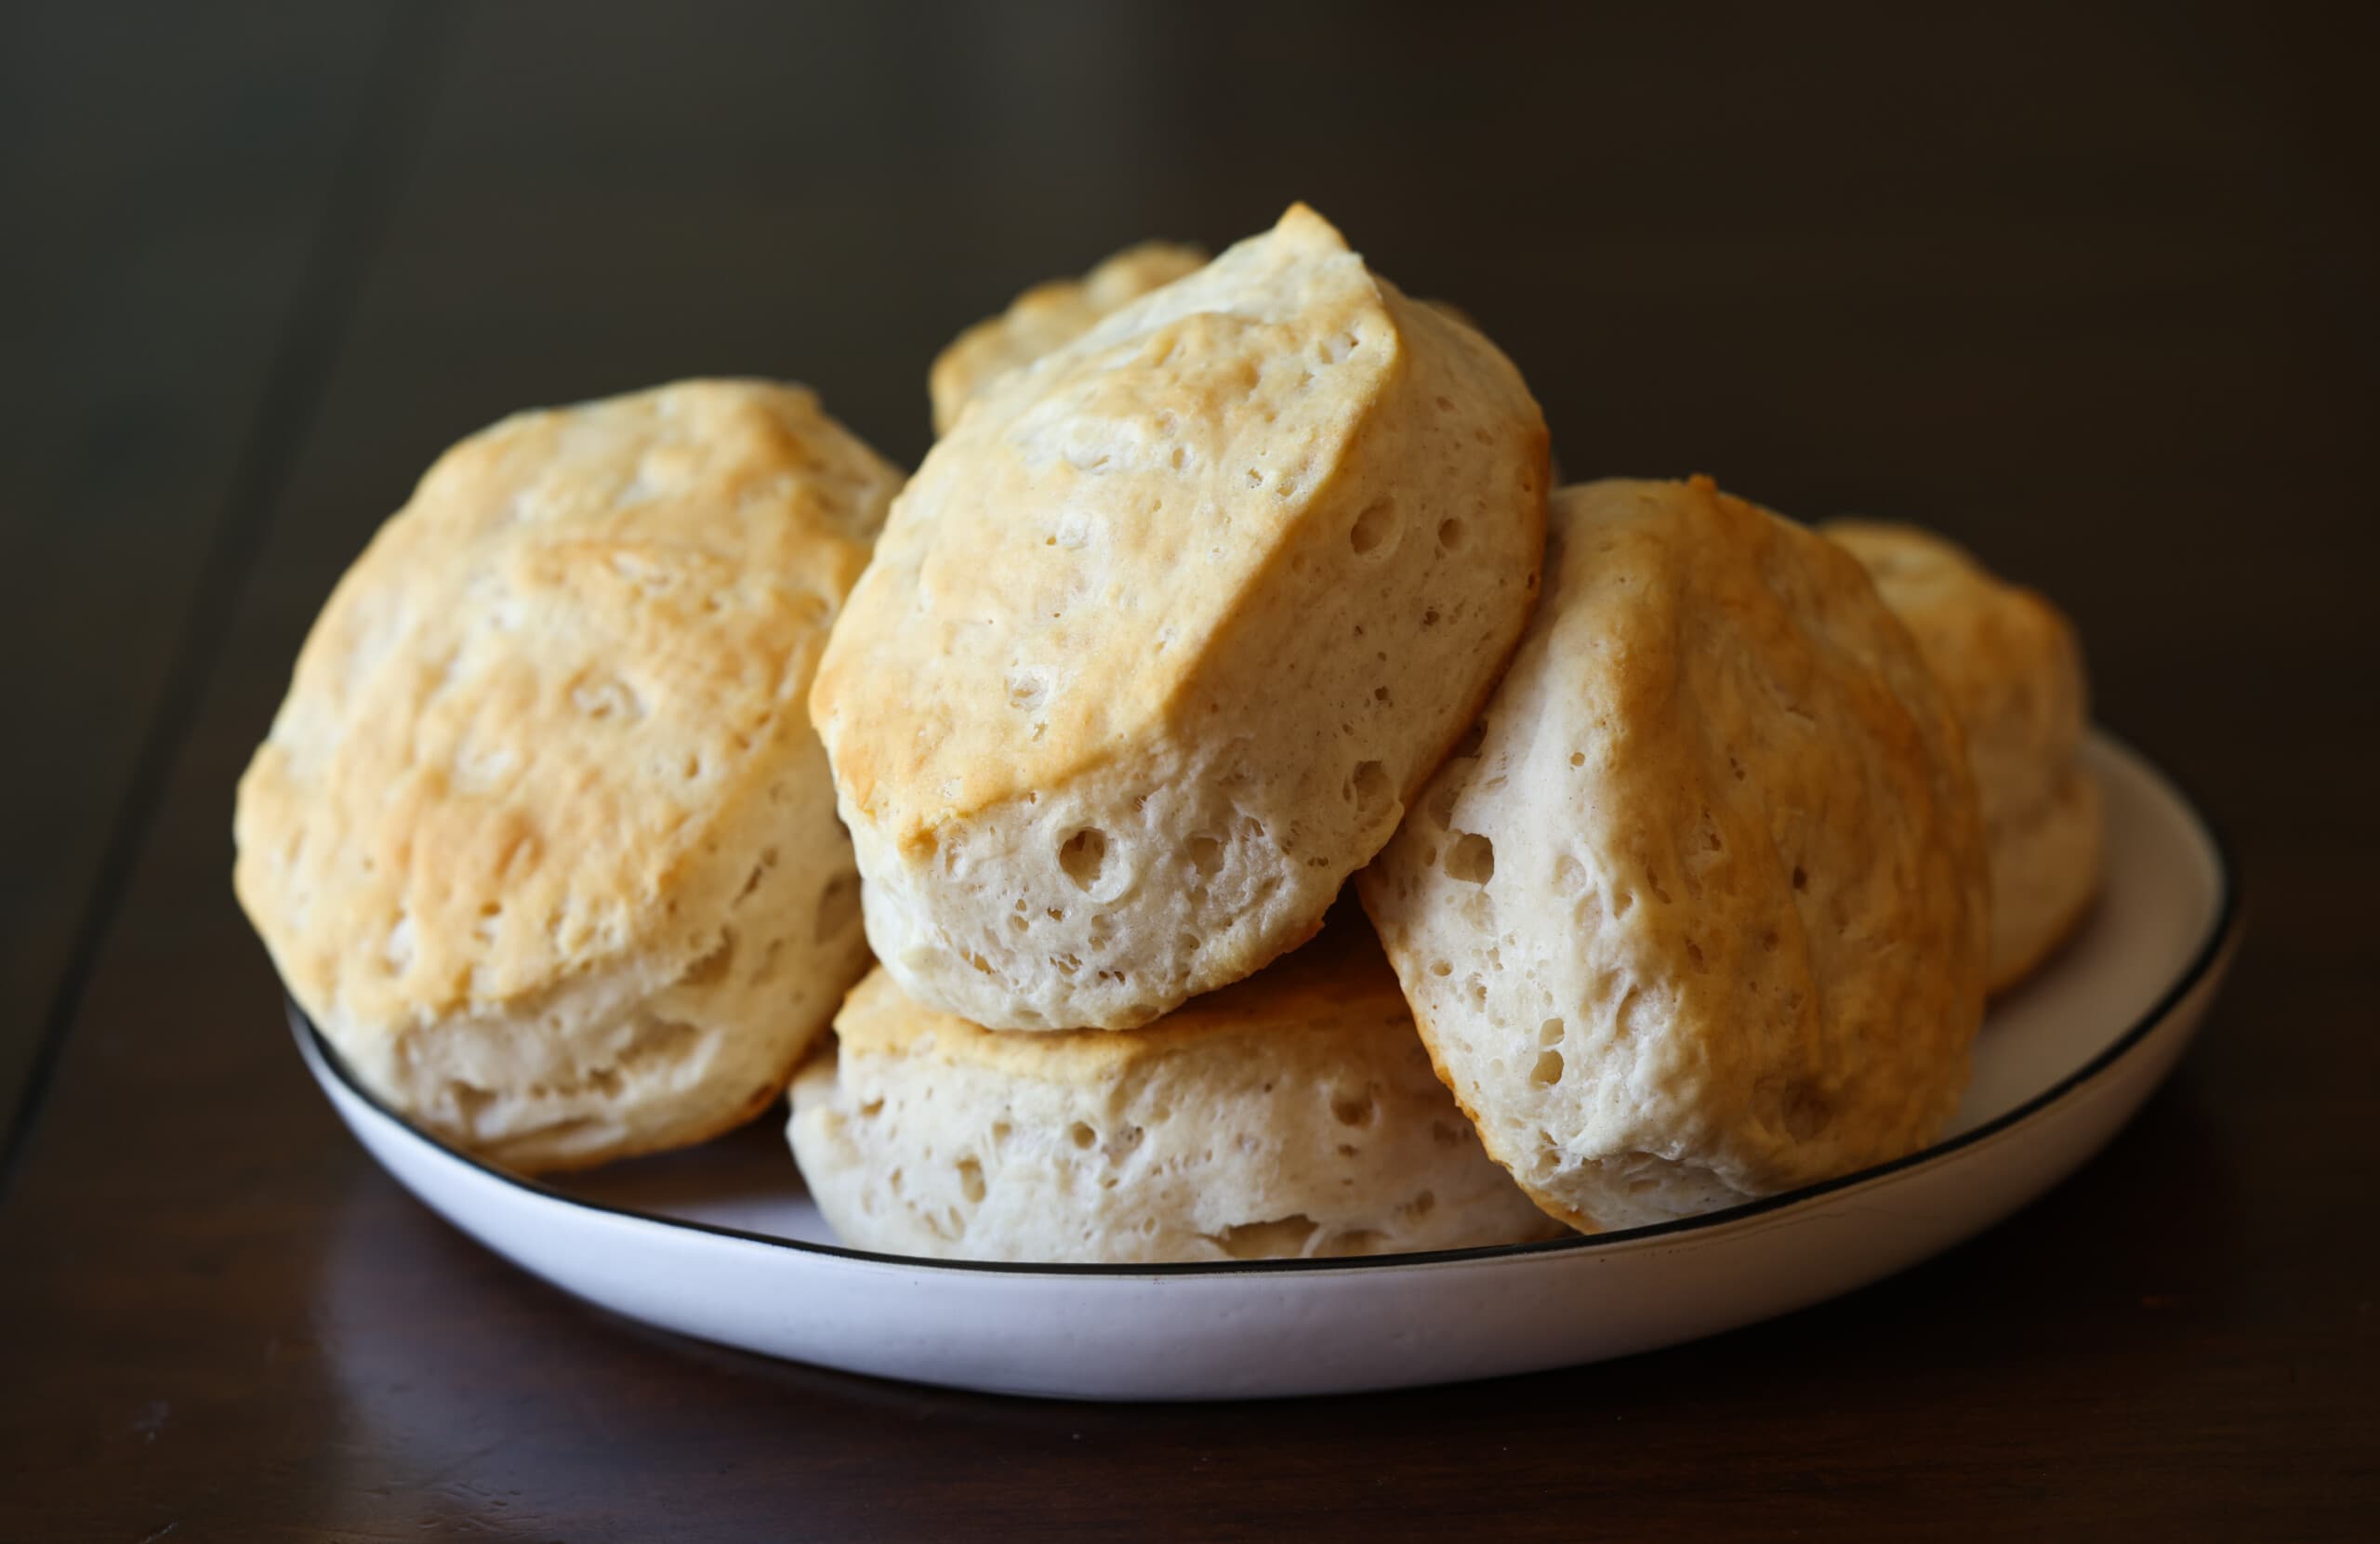 biscuits on a plate